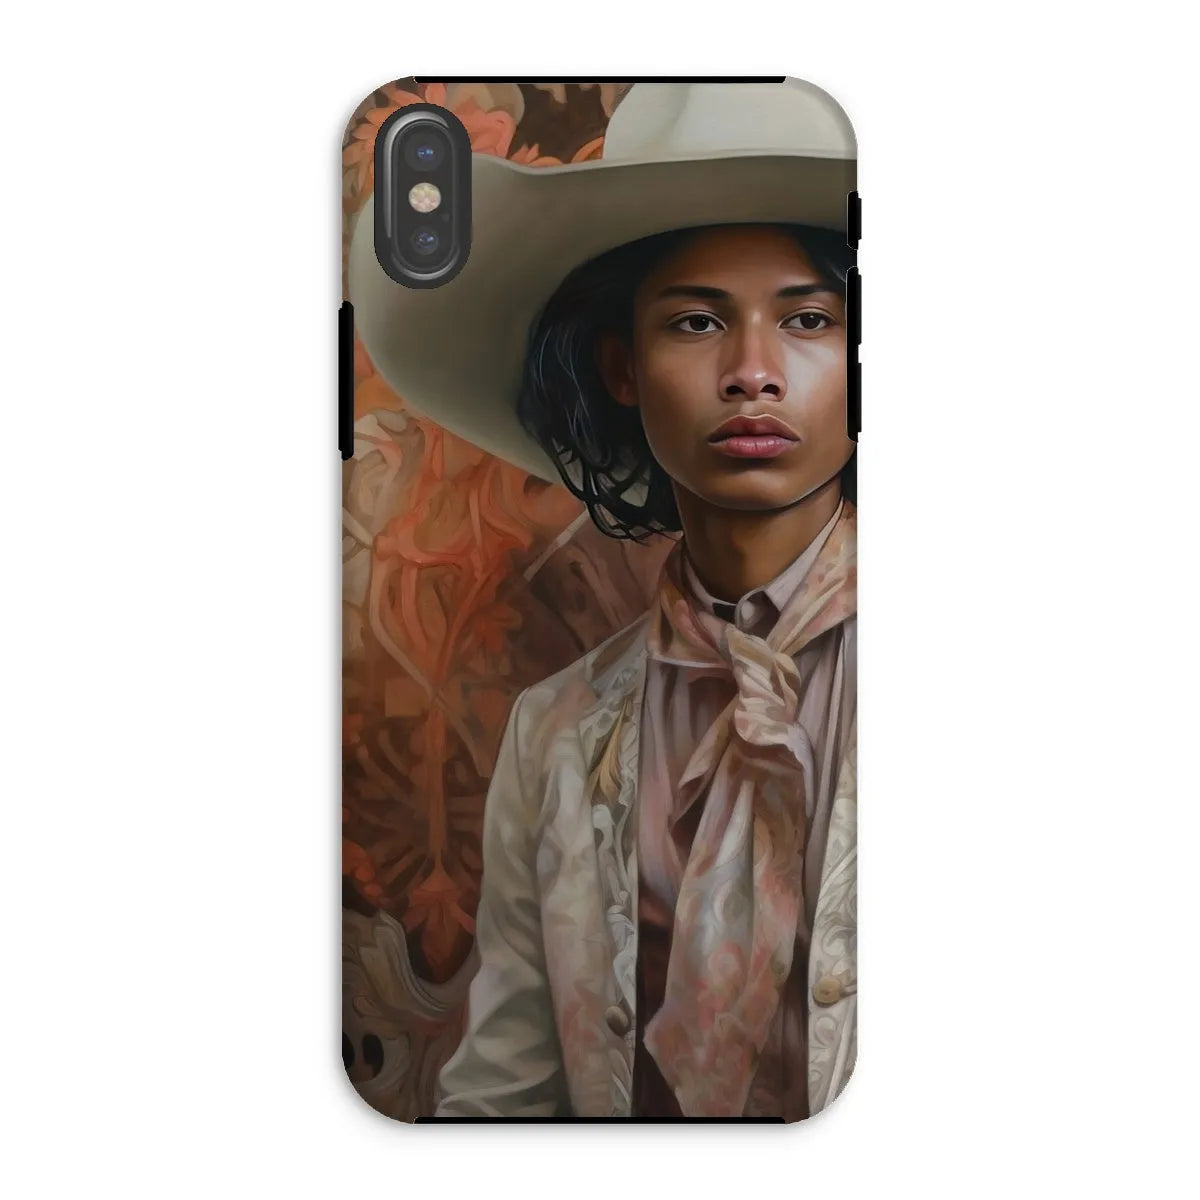 Arjuna - Gay South Asian Cowboy Art Phone Case - Iphone Xs / Matte - Mobile Phone Cases - Aesthetic Art